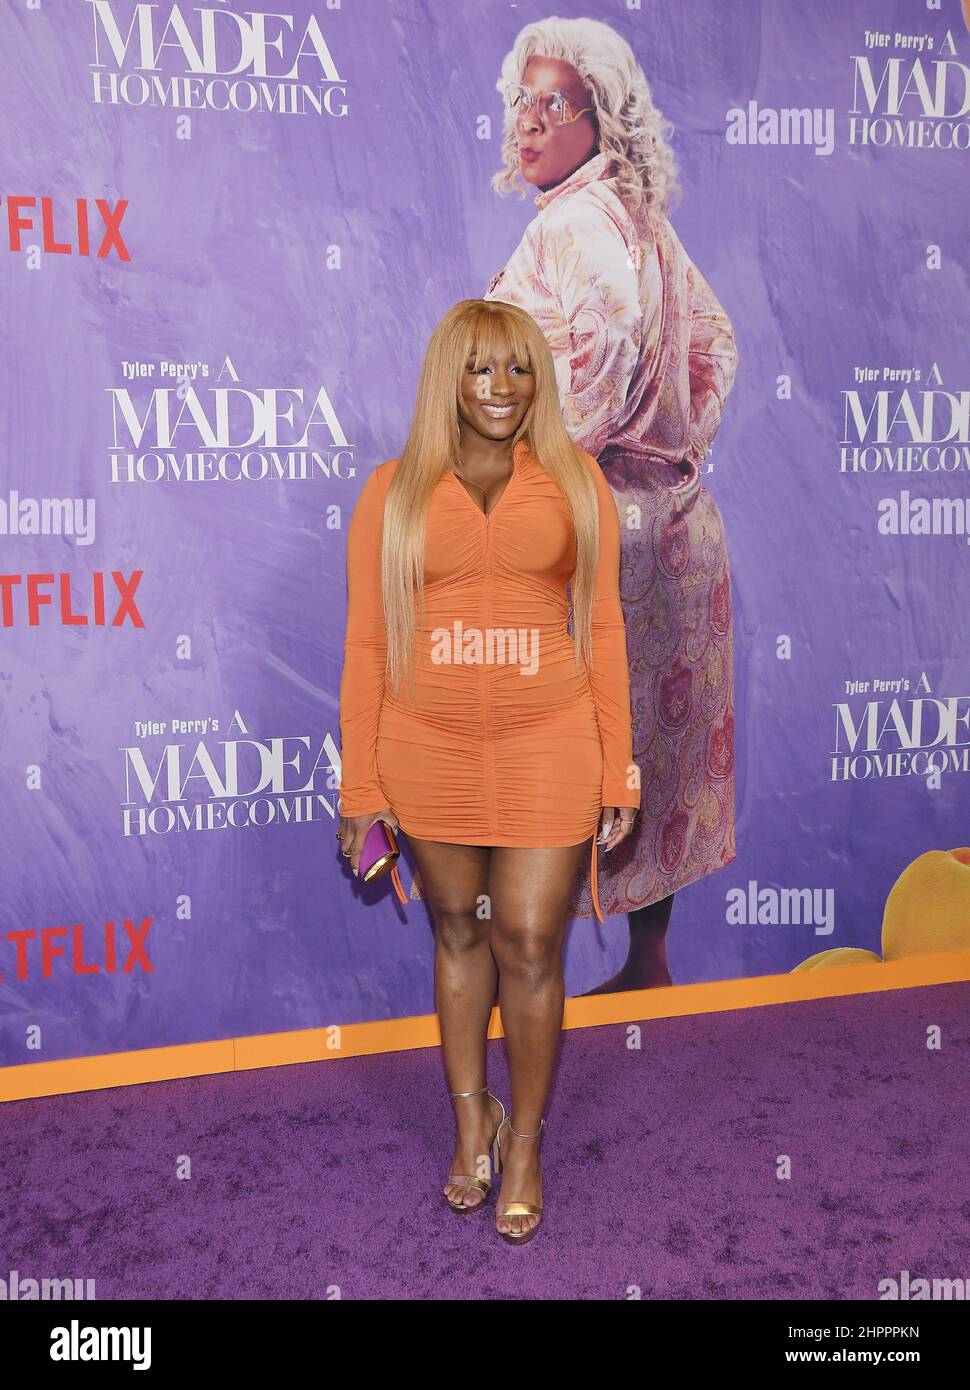 Los Angeles, CA, February 22, 2022. Mignon arrives at the World Premiere of Netflix's TYLER PERRY'S A MADEA HOMECOMING at the Regal LA Live in Los Angeles, CA on Tuesday, ?February 22, 2022. (Photo By Sthanlee B. Mirador/Sipa USA) Stock Photo